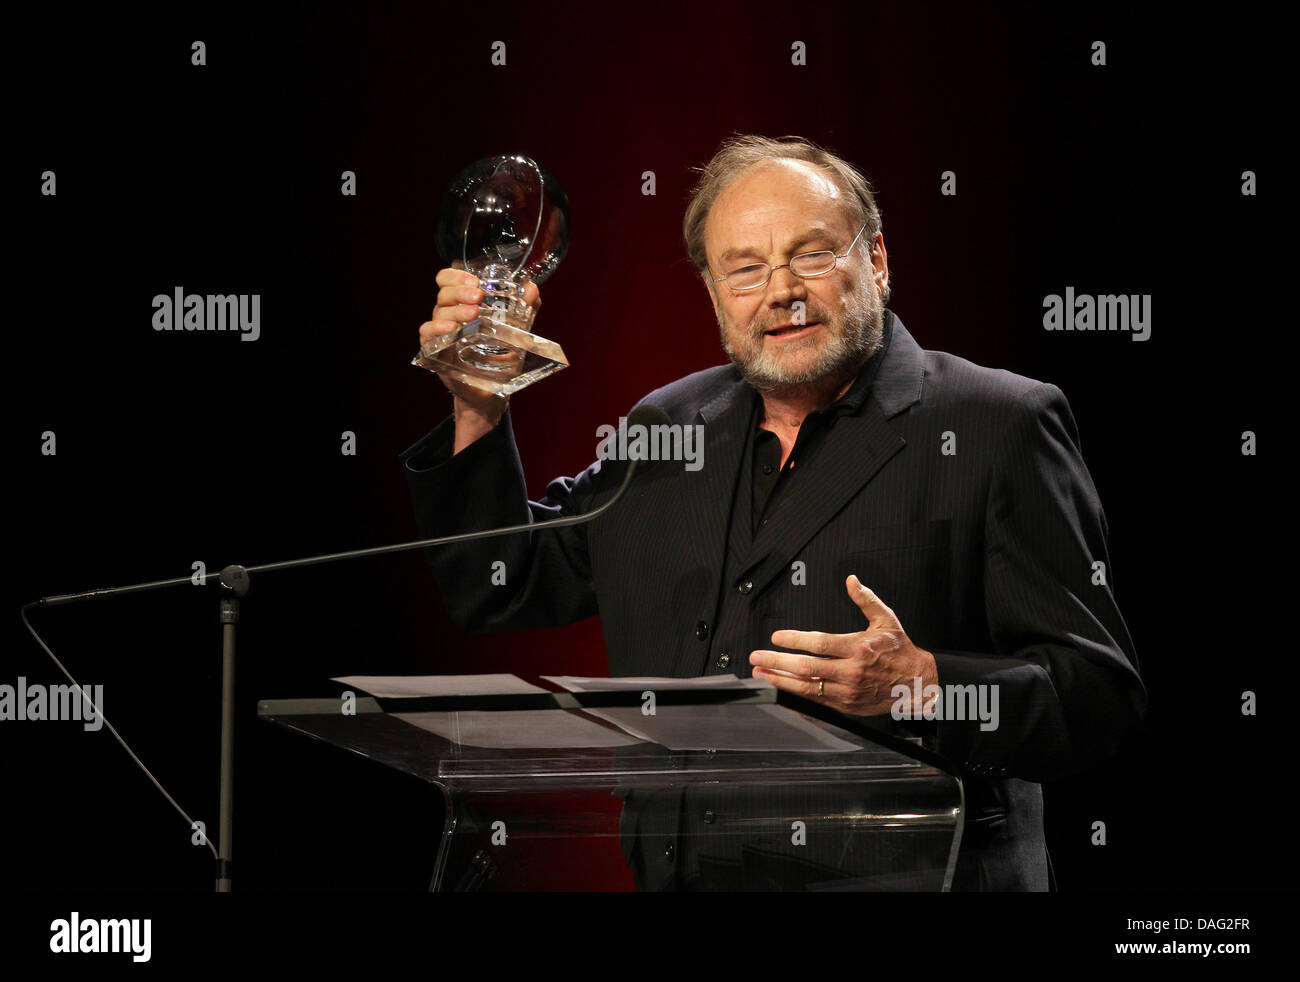 Austrian actor Klaus Maria Brandauer speaks during the award ceremony of the Steiger Award in Bochum, Germany, 12 March 2011. Brandauer was awarded the Steiger Award, which honours German and international personalities, in the category 'Film'. Photo: Rolf Vennenbernd Stock Photo